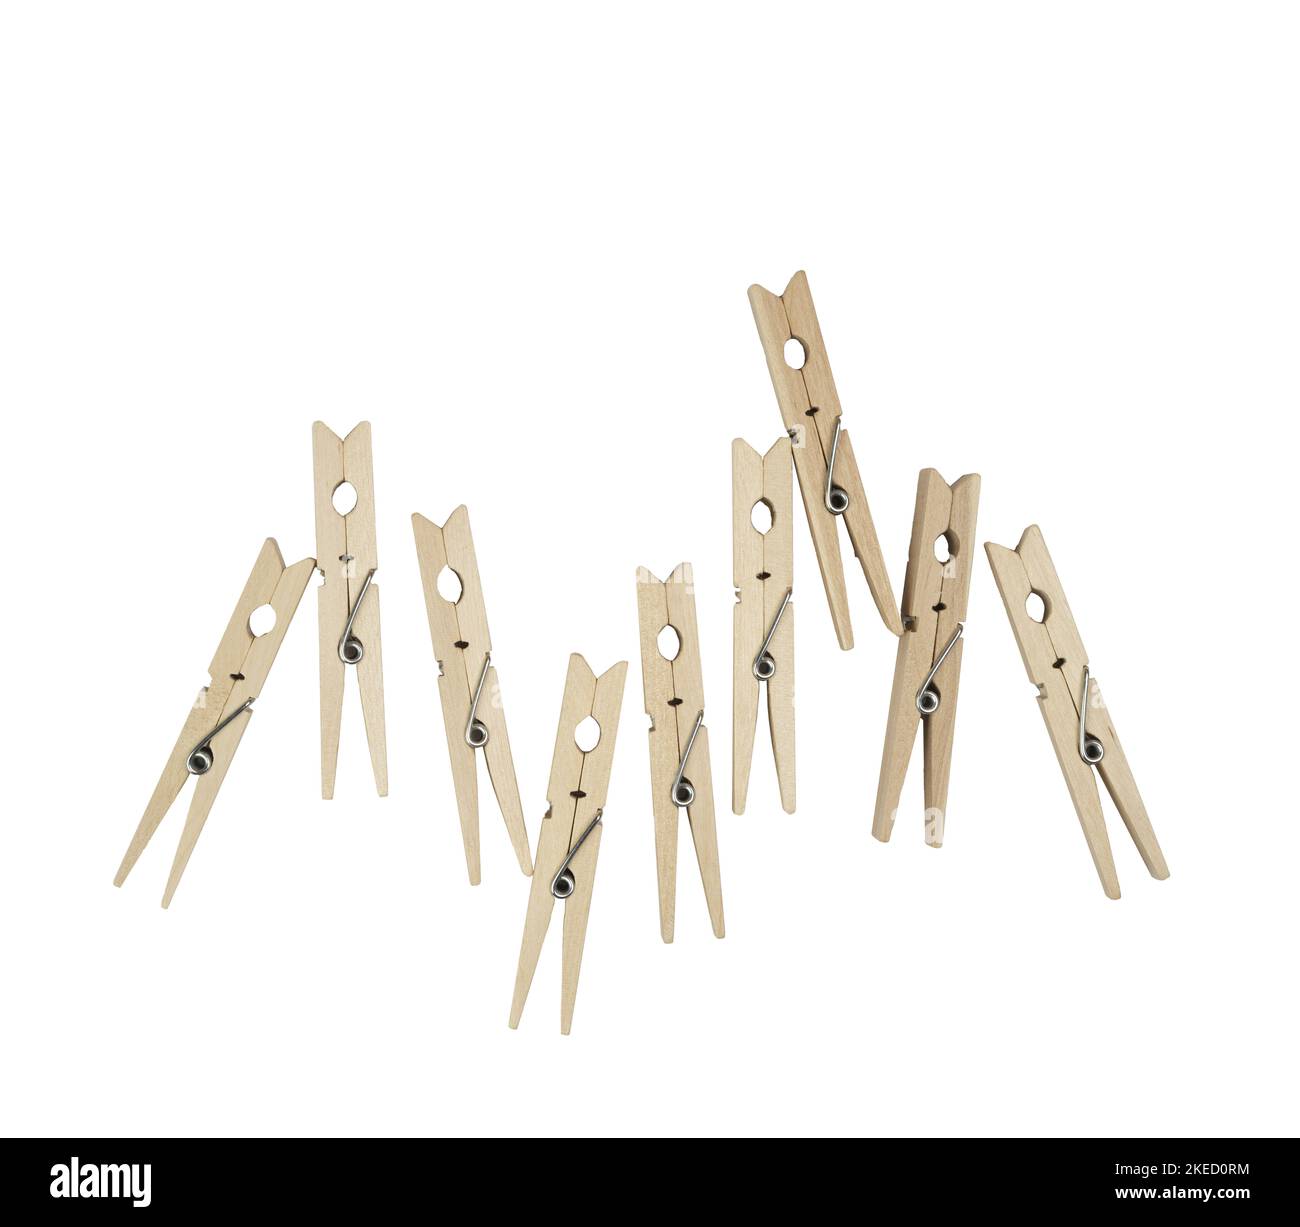 Some wooden clothespins on a transparent background Stock Photo